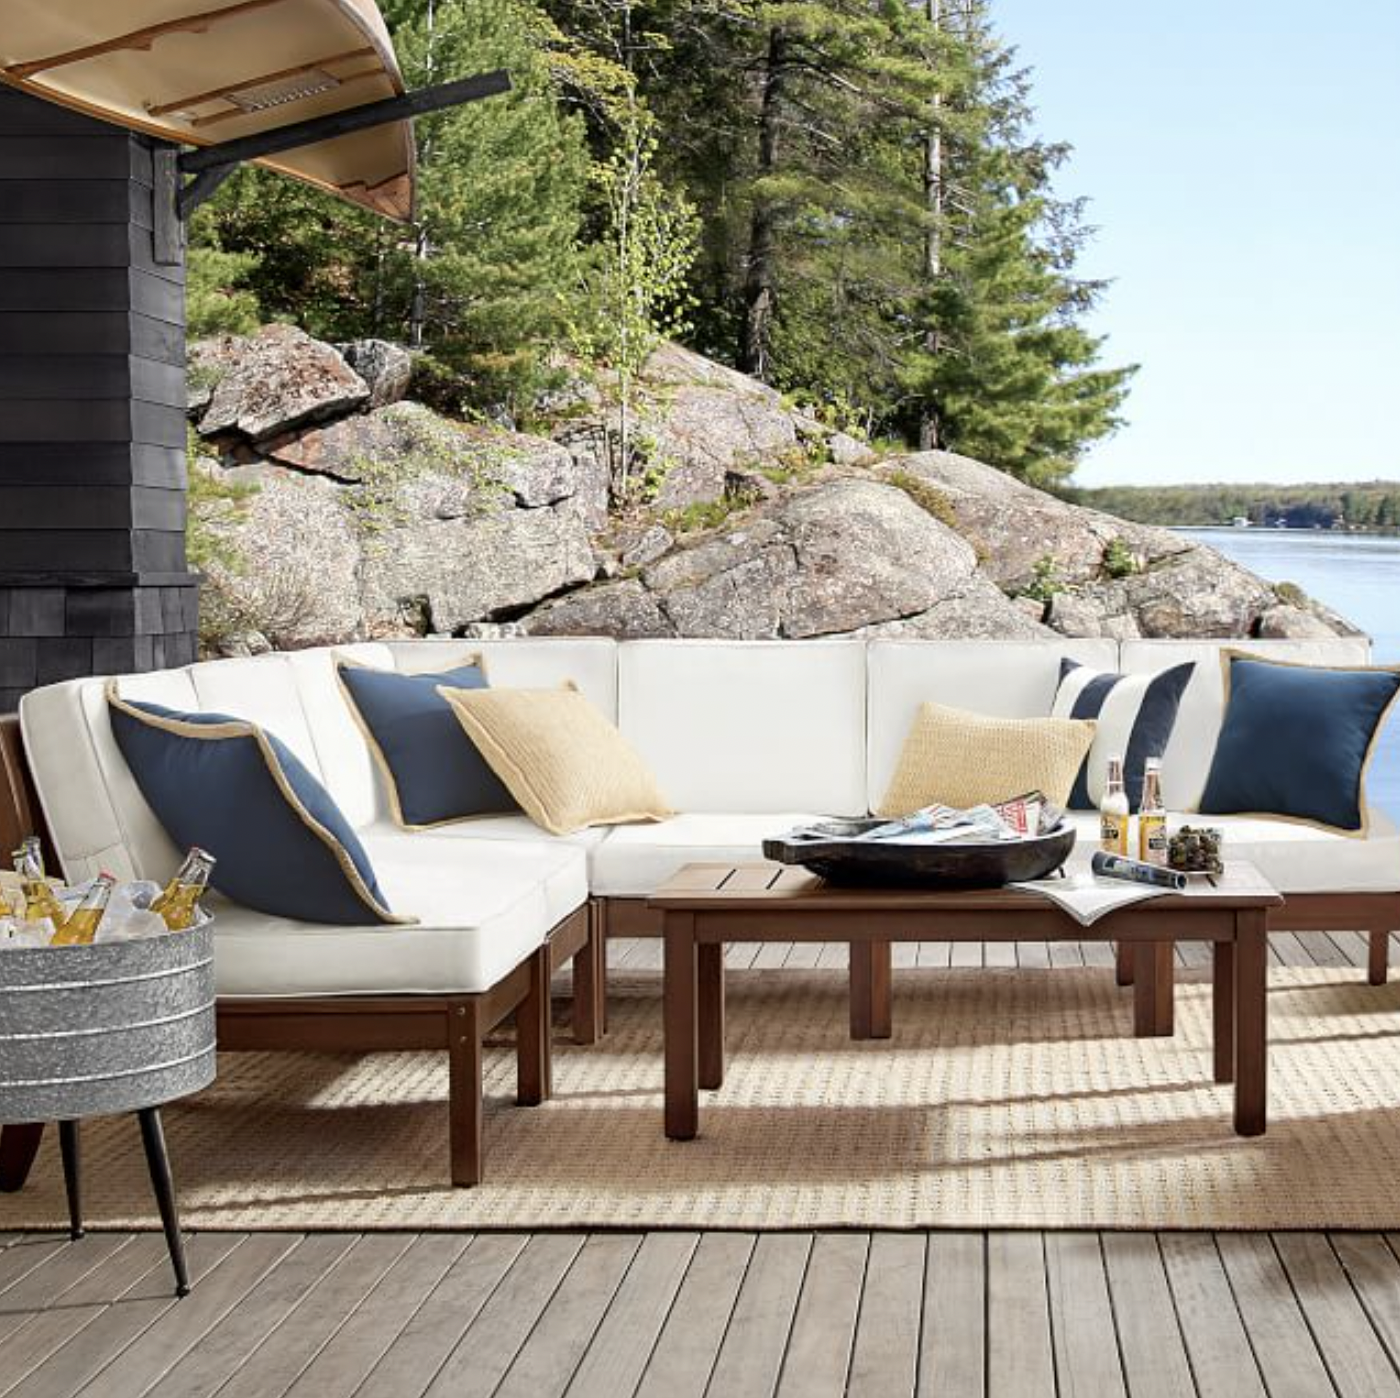 Save Up to 70% at Pottery Barn, Including 50% Off Beautiful Patio Furniture